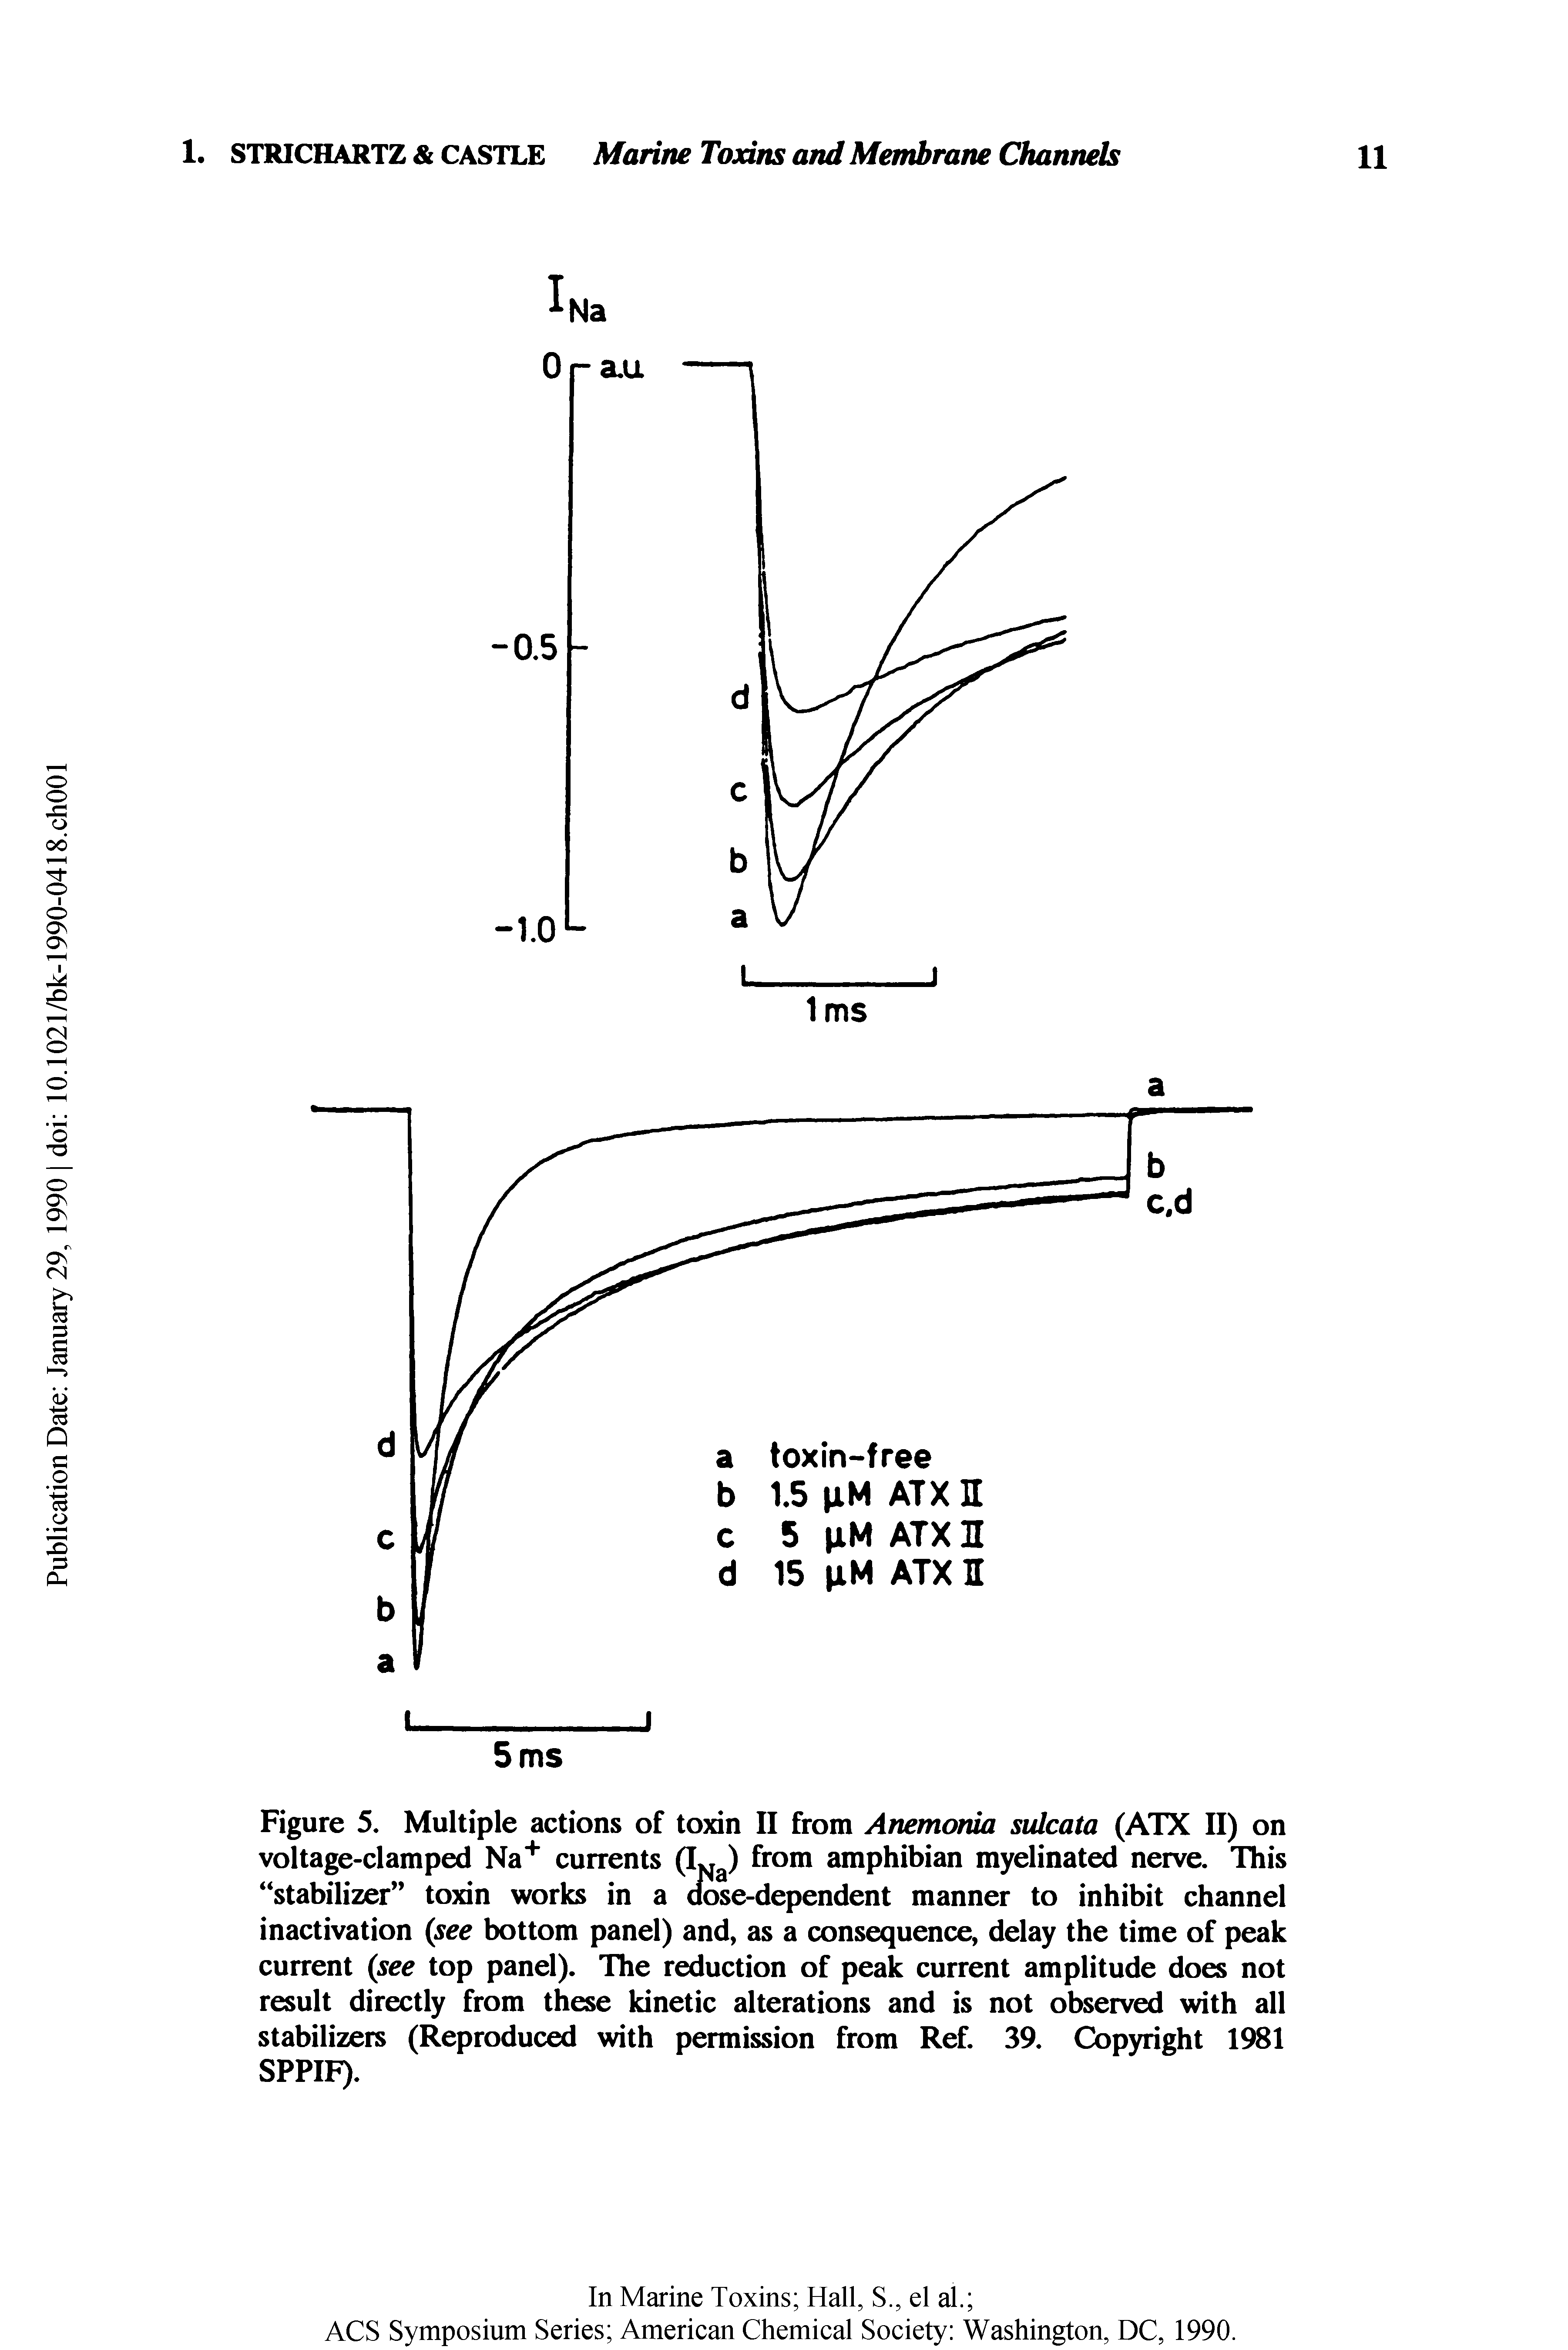 Figure 5. Multiple actions of toxin II from Ammonia sulcata (ATX II) on voltage-clamped Na currents (Ij ) from amphibian myelinated nerve. This stabilizer toxin works in a dose-dependent manner to inhibit channel inactivation see bottom panel) and, as a consequence, delay the time of peak current see top panel). The reduction of peak current amplitude does not result directly from these kinetic alterations and is not observed with all stabilizers (Reproduced with permission from Ref. 39. Copyright 1981 SPPIF).